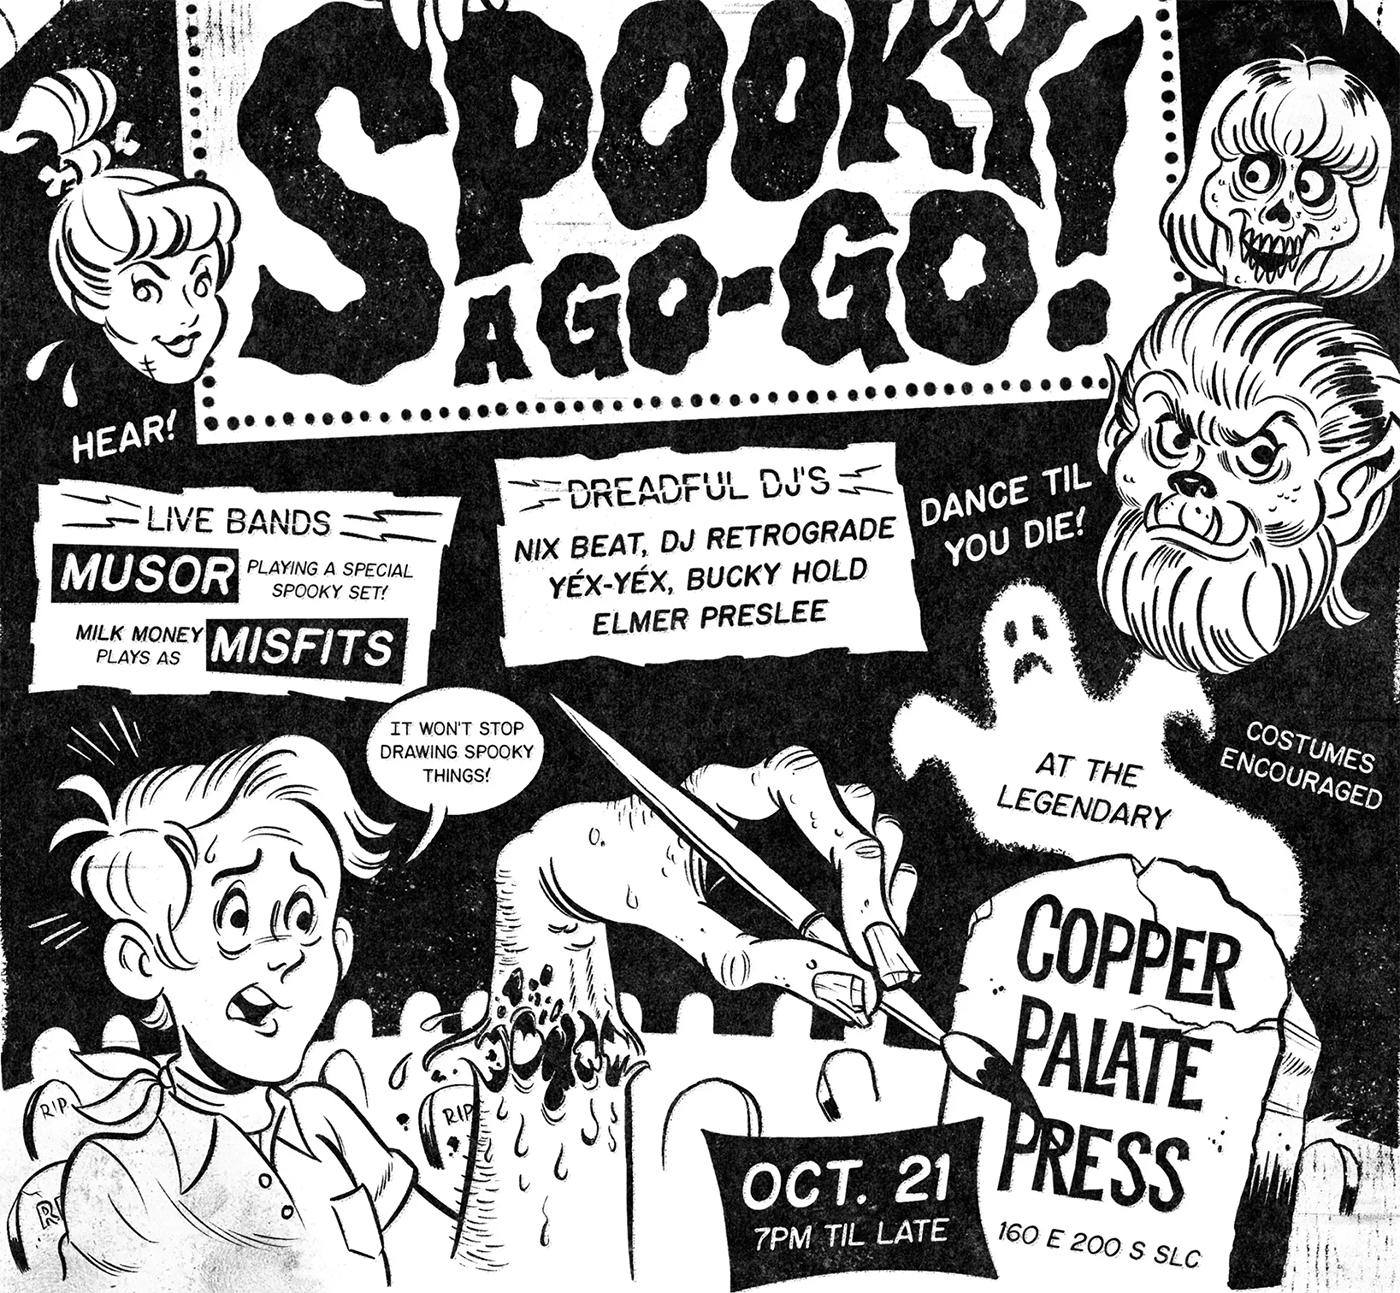 Constantly buzzing with events and gallery shows, on Oct. 21, Copper Palate is featuring an event hosted by Robin Banks, Spooky Ago-Go, aimed at reviving the retro, weird and gimmicky aspect of Halloween.